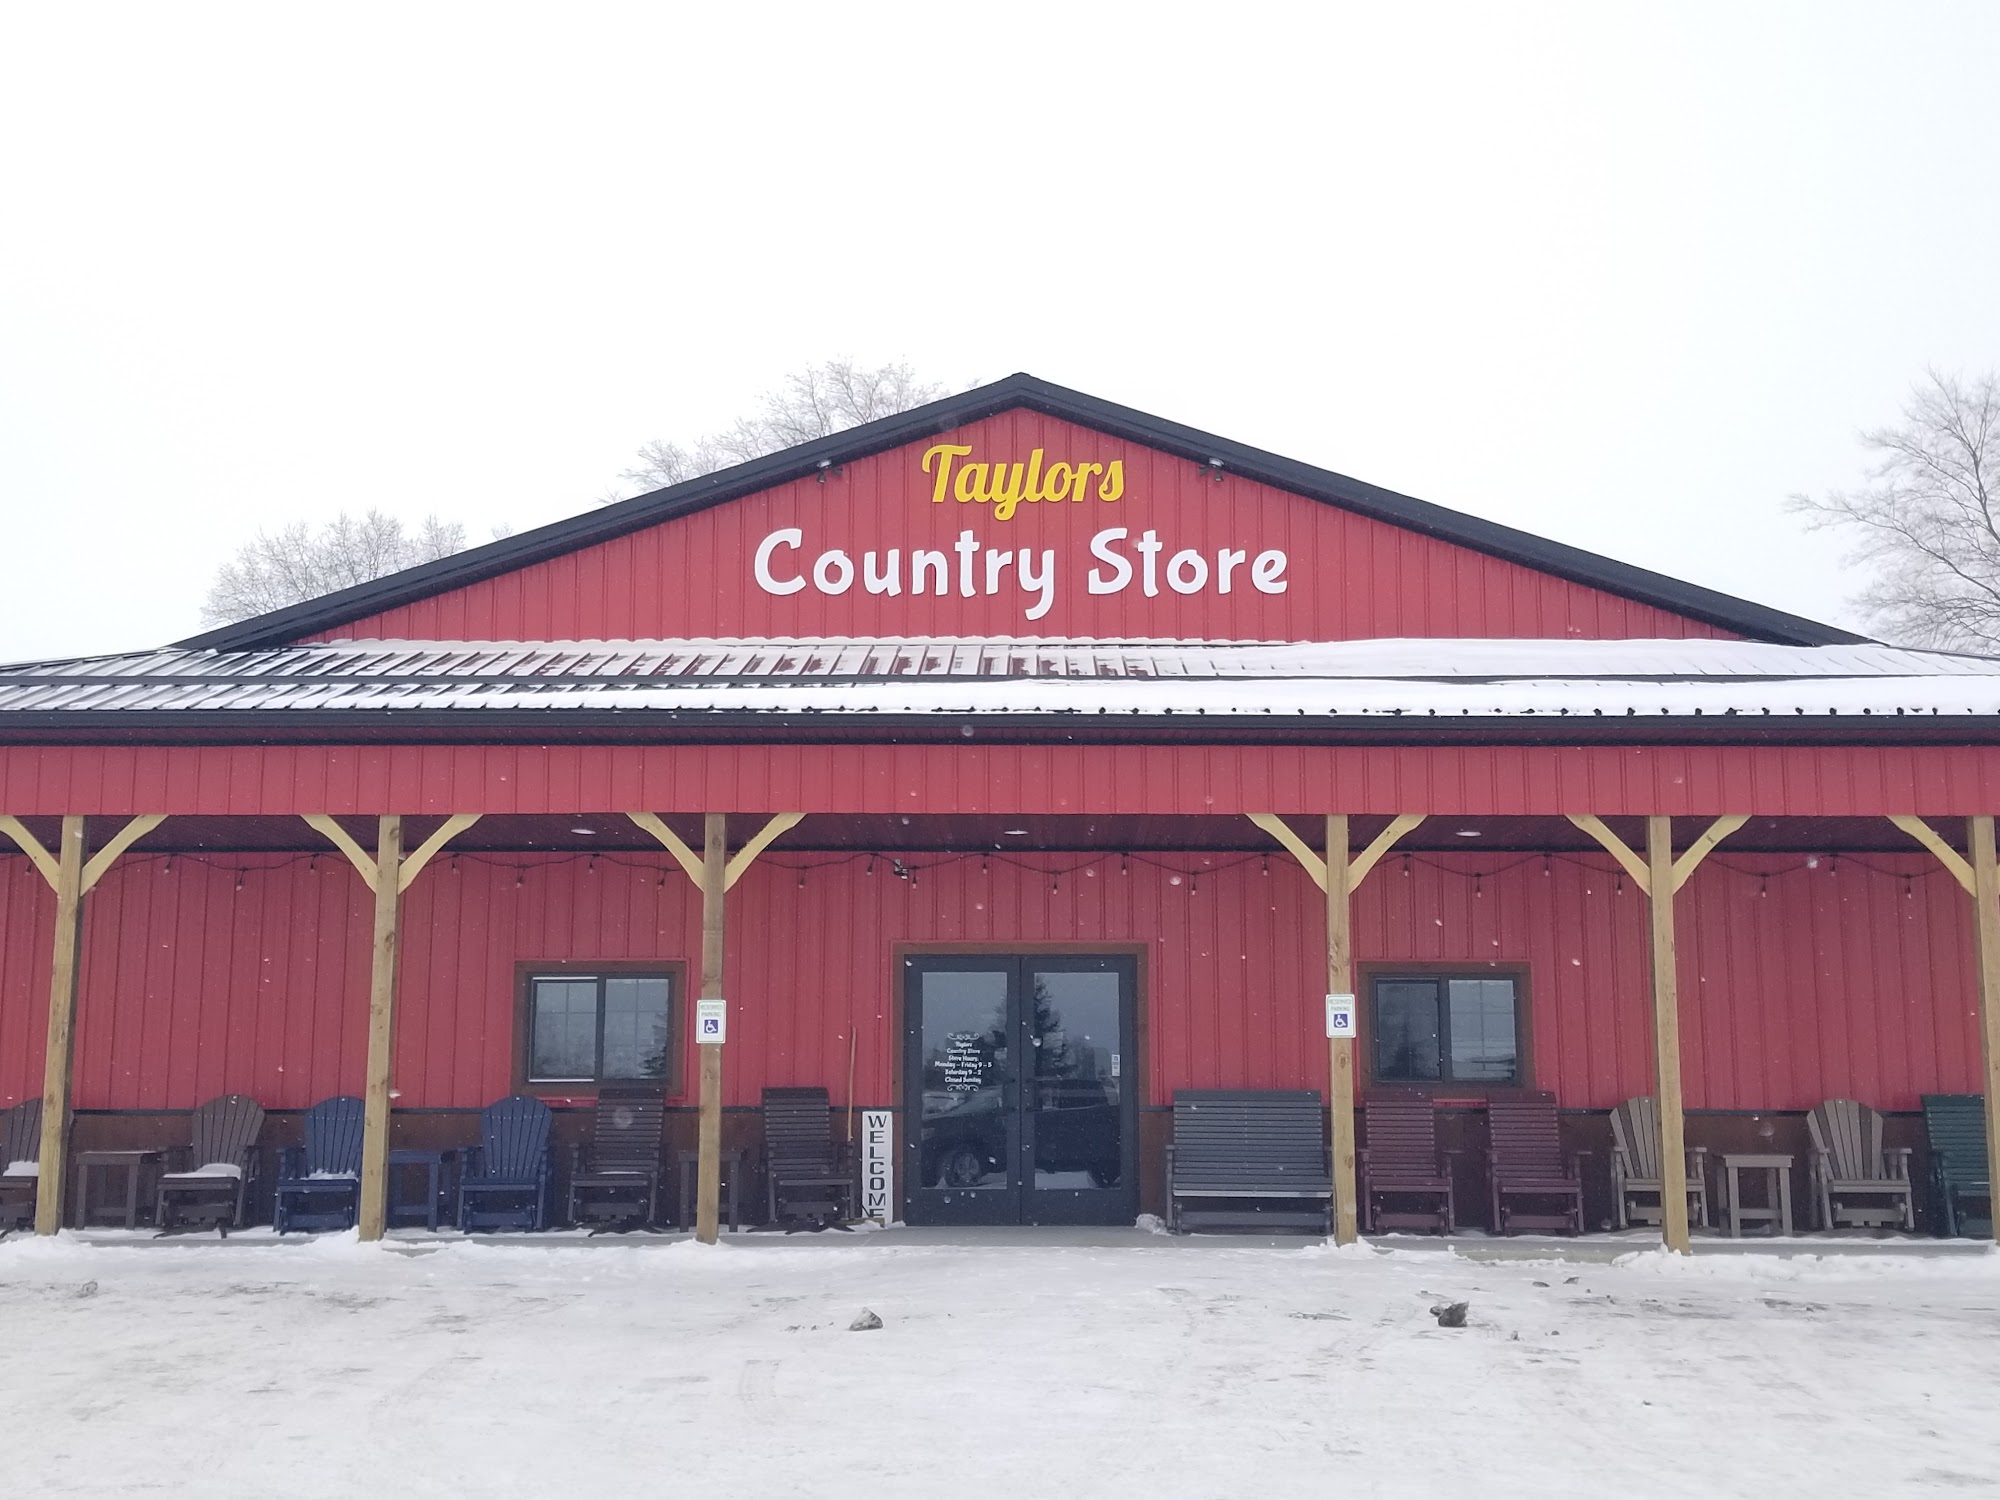 Taylor's Country Store